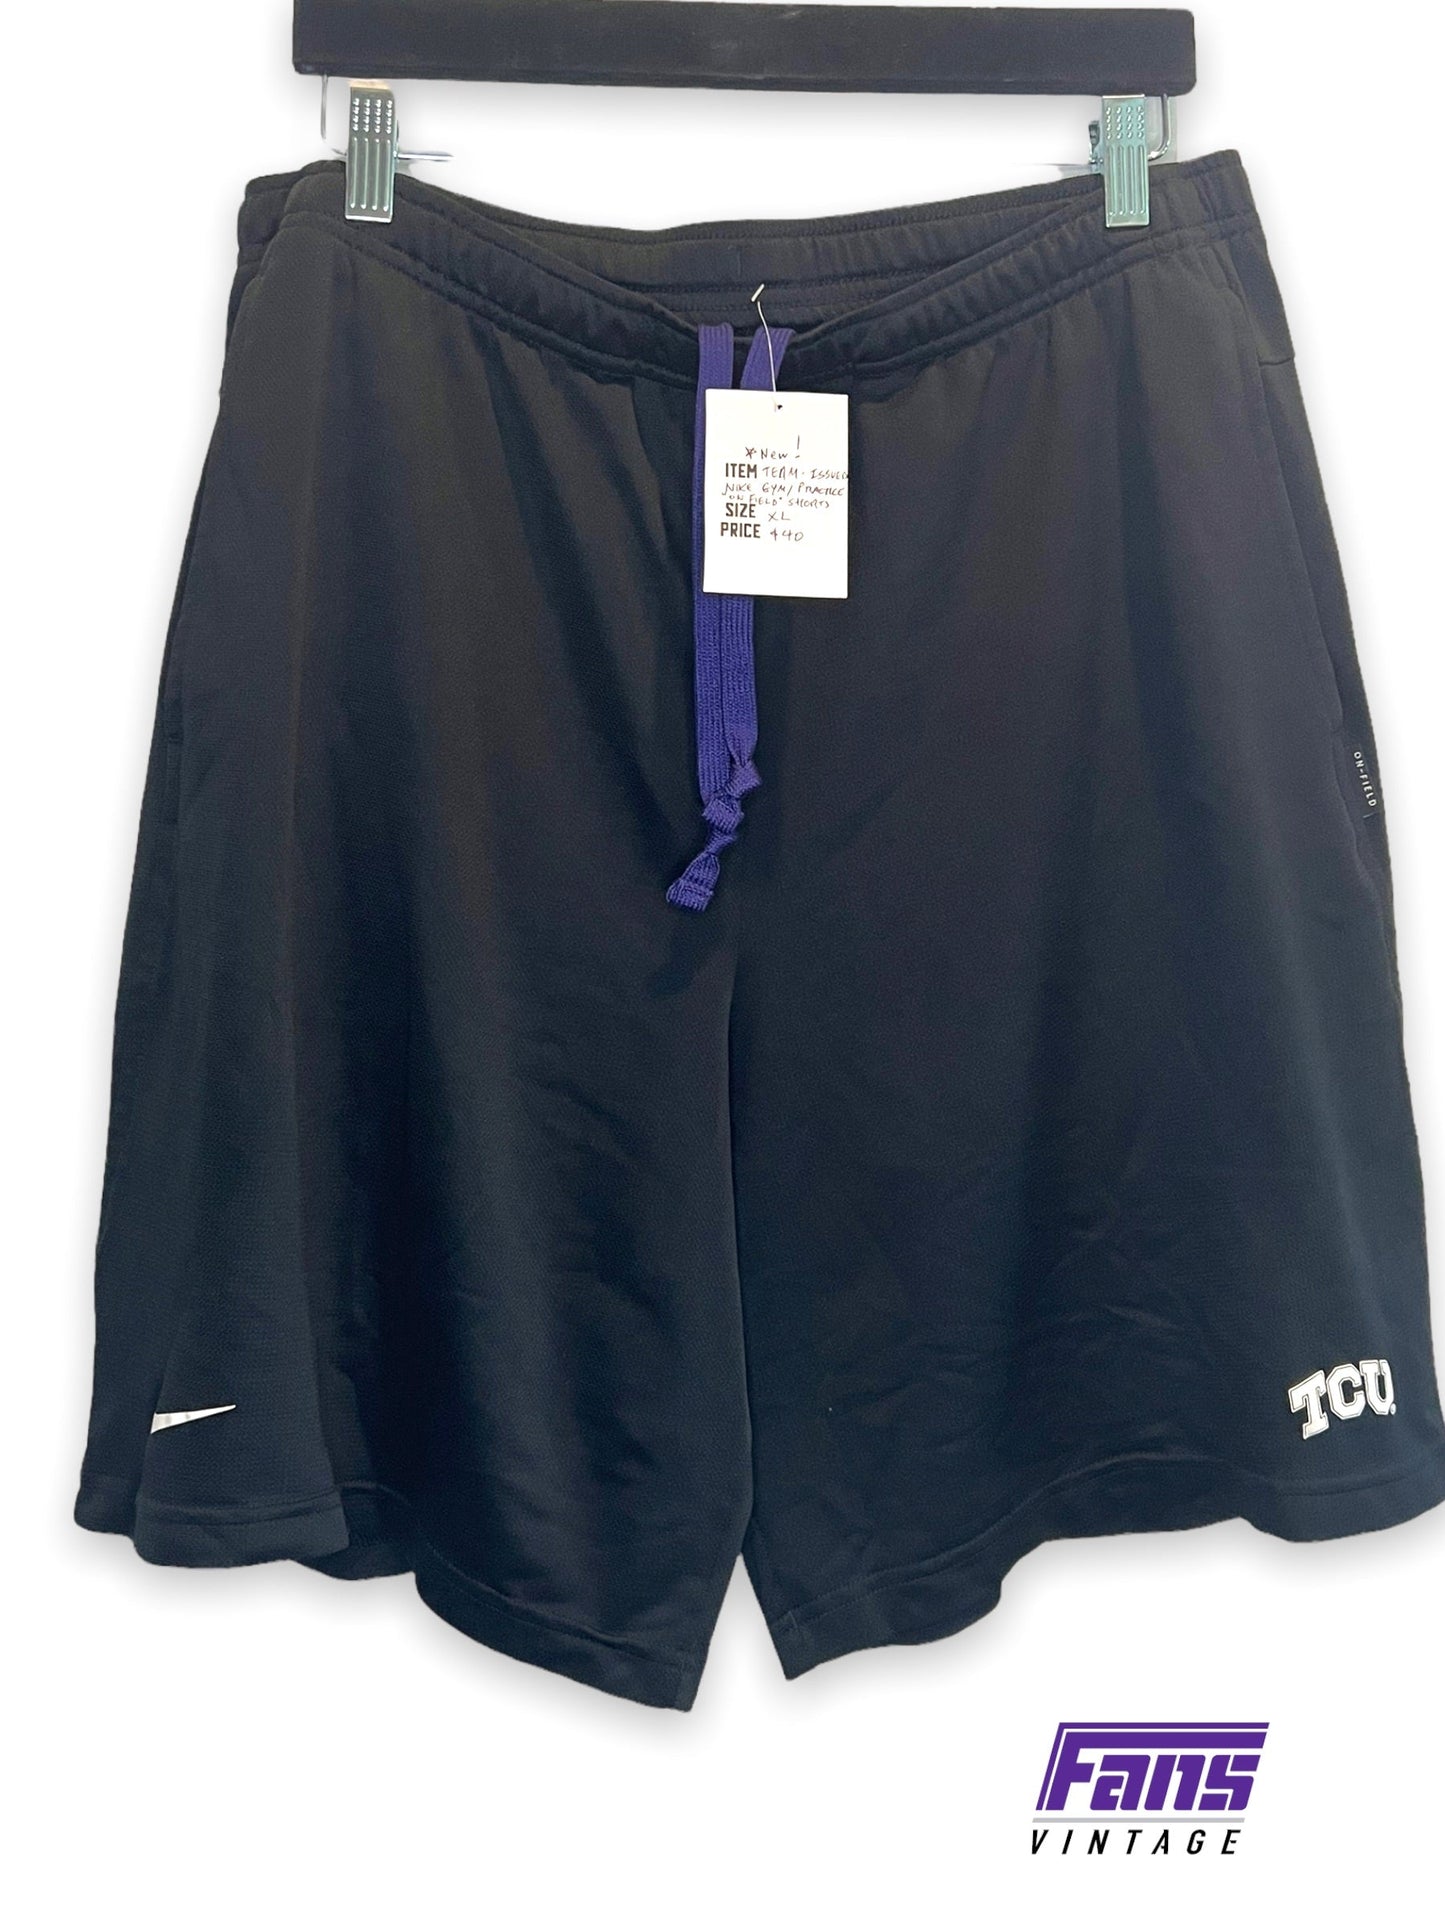 New! Team-Issued TCU Athletics Workout Shorts - Nike Drifit "On Field" Edition